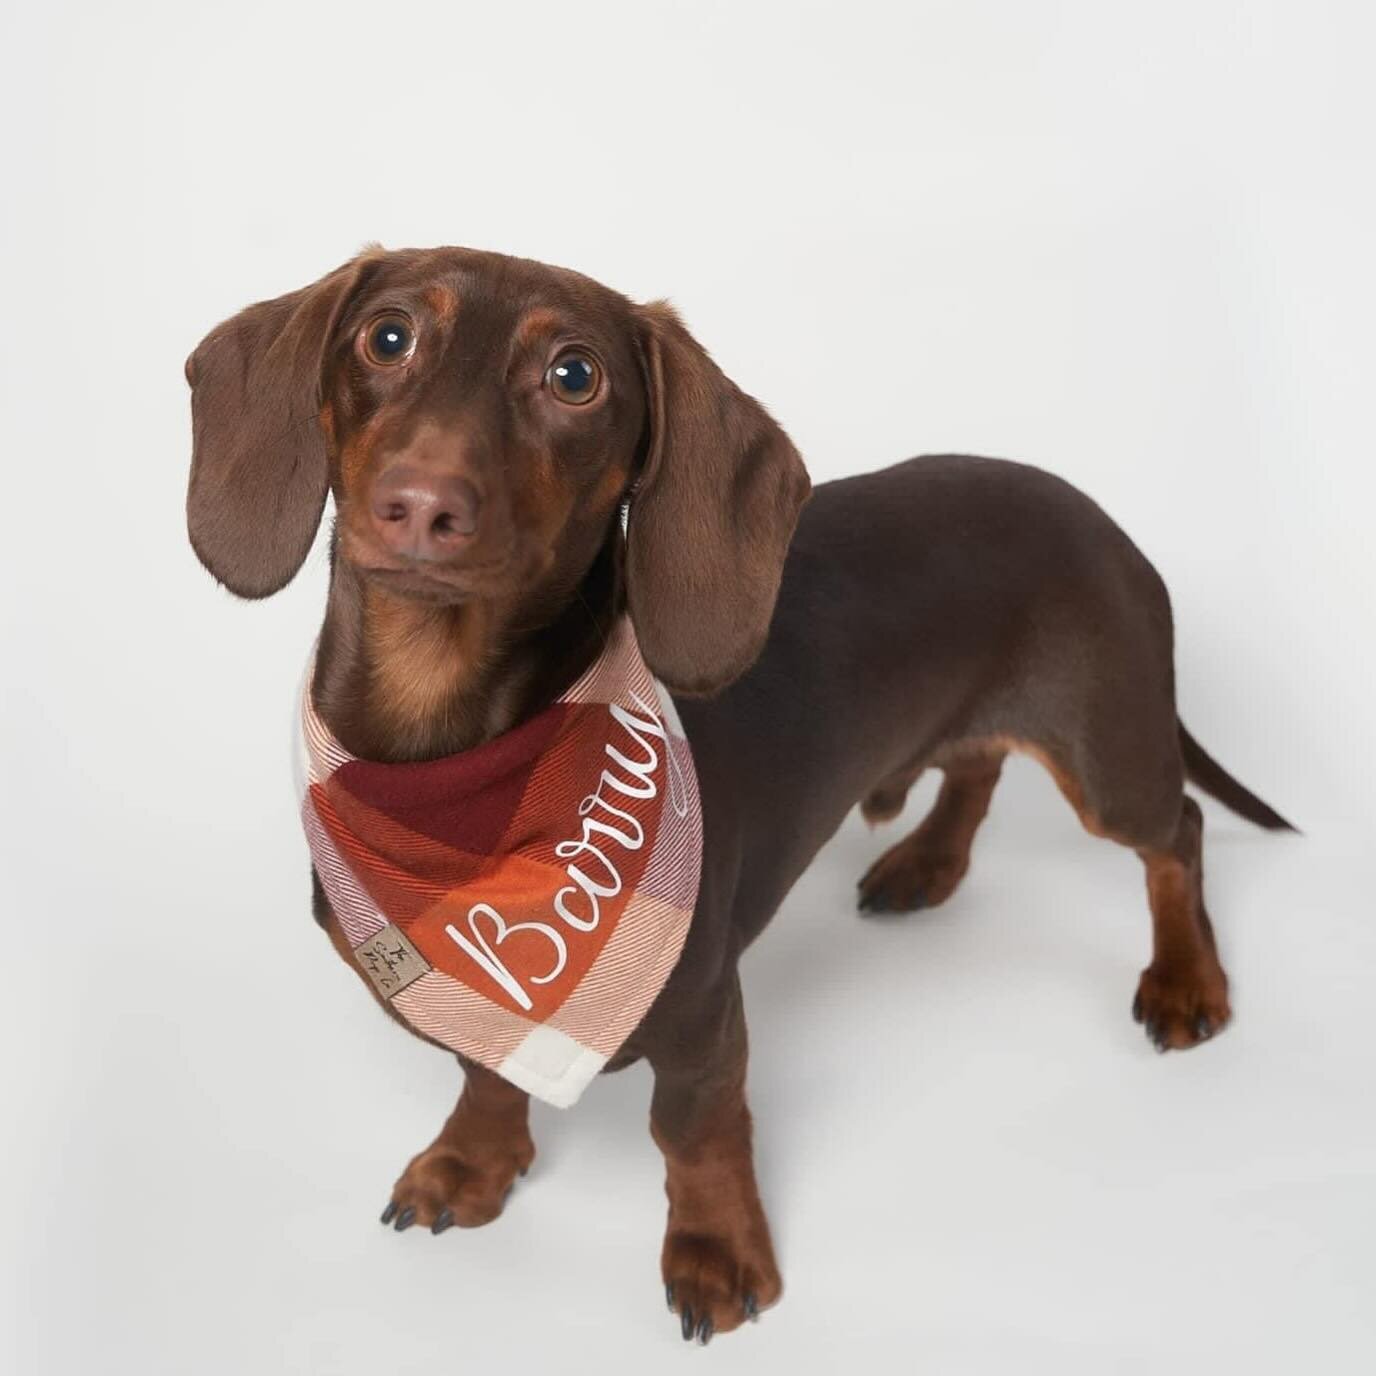 Barry, a dachshund, is undeniably a star in his own right. We had the honor of welcoming him into our studio, where we knew we would be able to capture his personality. 

Ready to inquire about your dog portrait session?